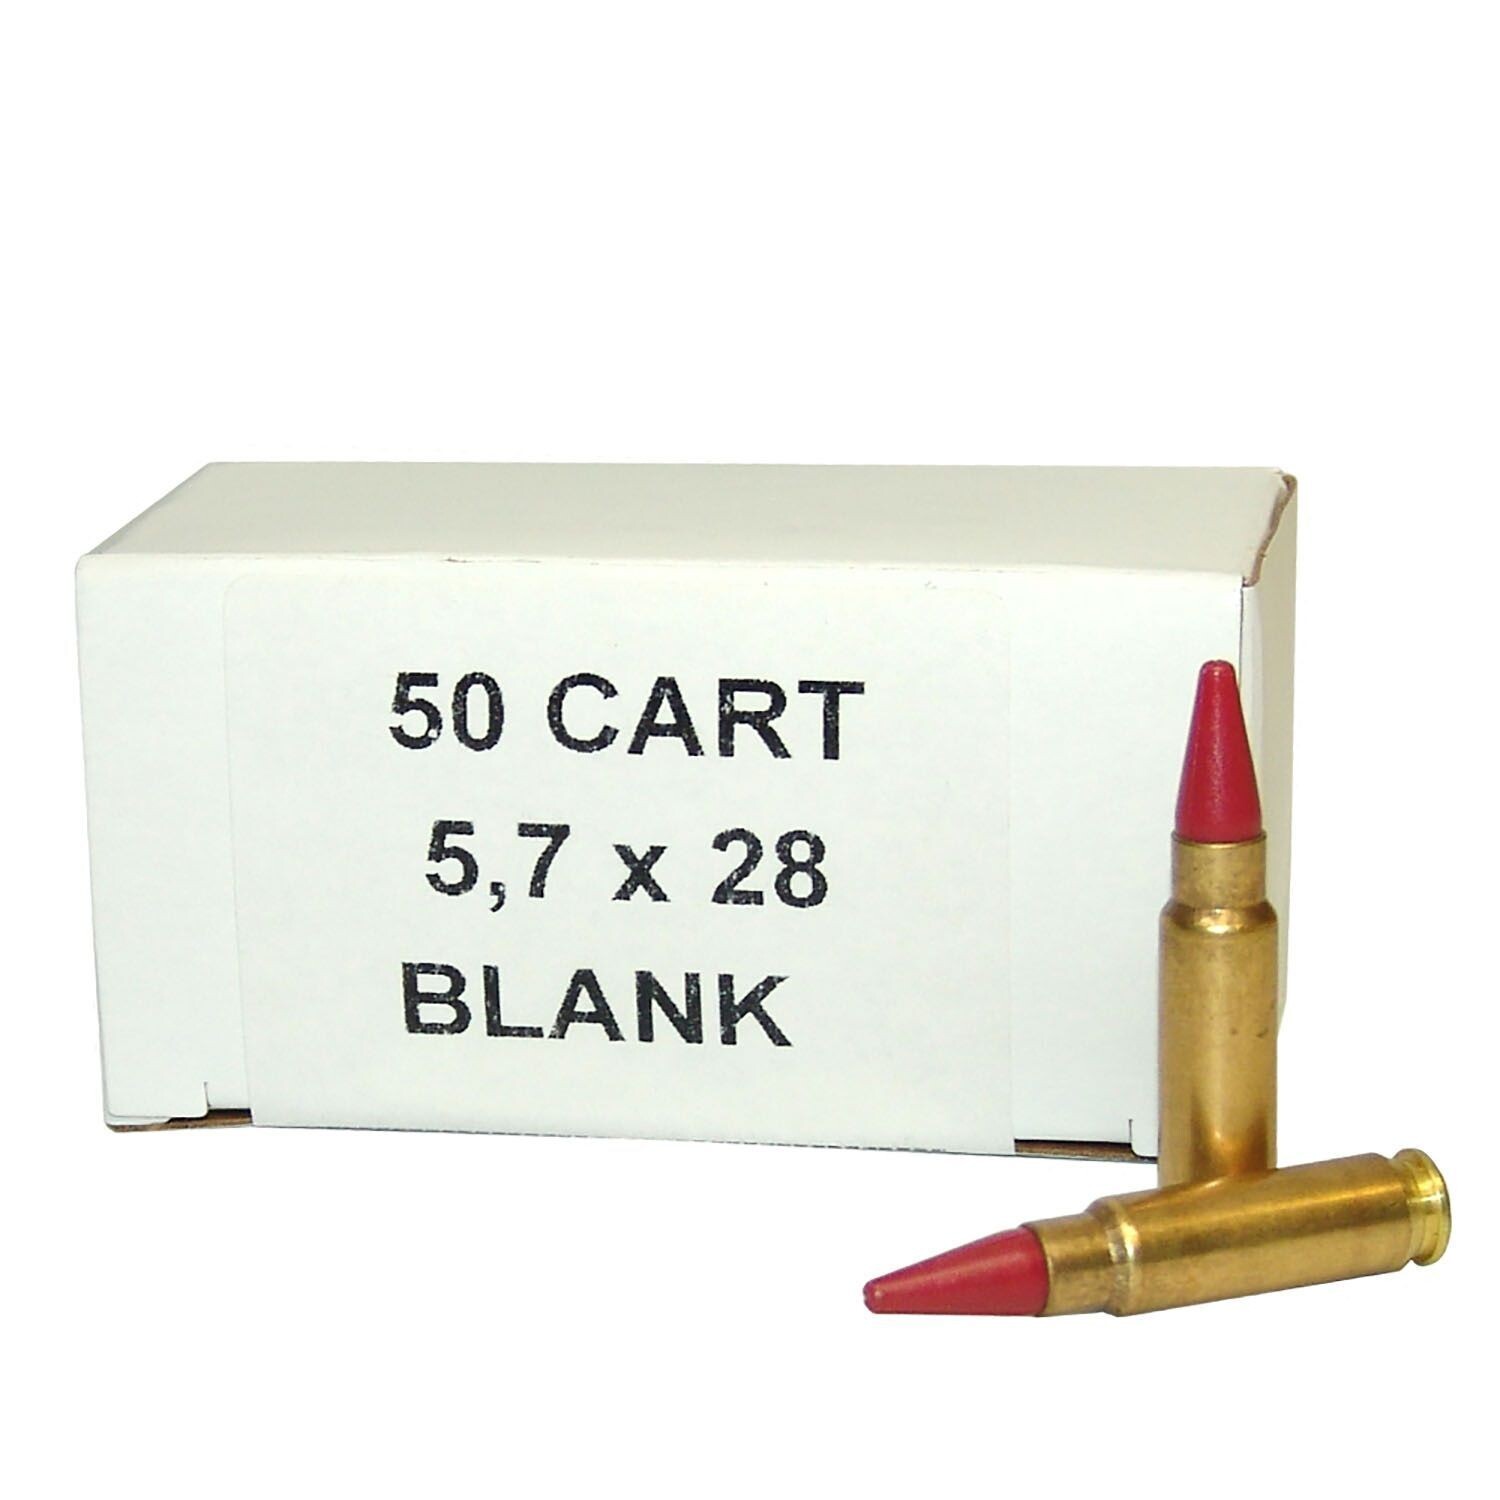 5.7x28mm Blank LE - 500 ROUNDS
FN America